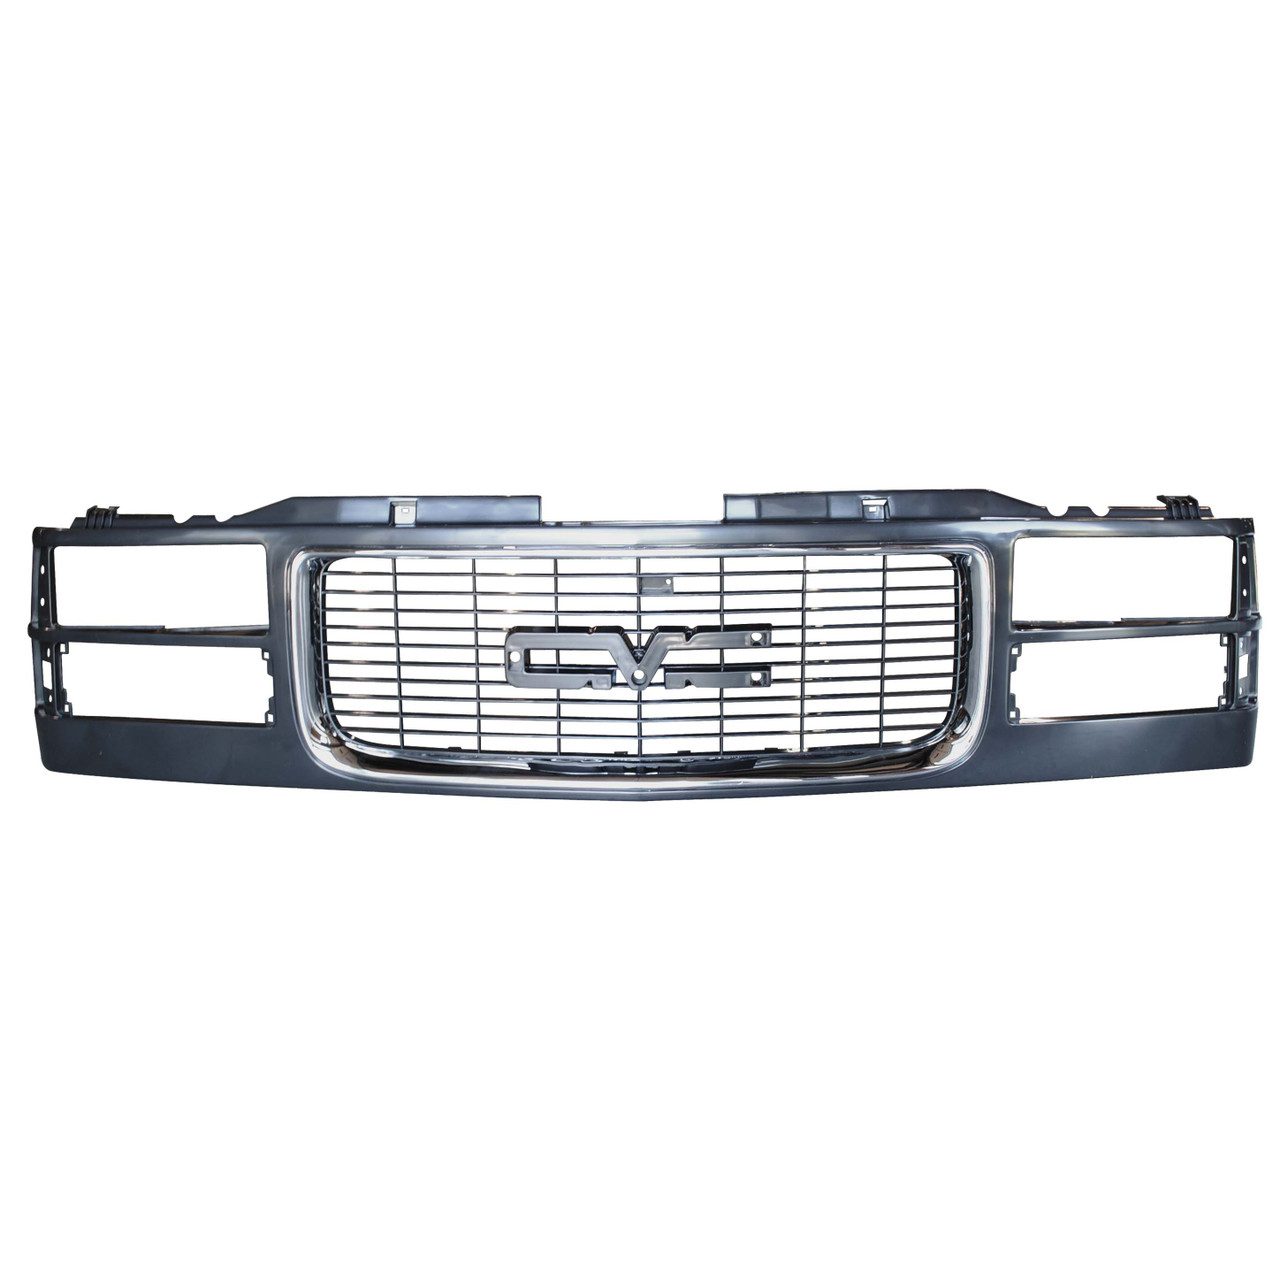 1994-1998 GMC Pickup Grille for Composite Headlights Black (Paint to Match) w/ Chrome Trim-0853-044